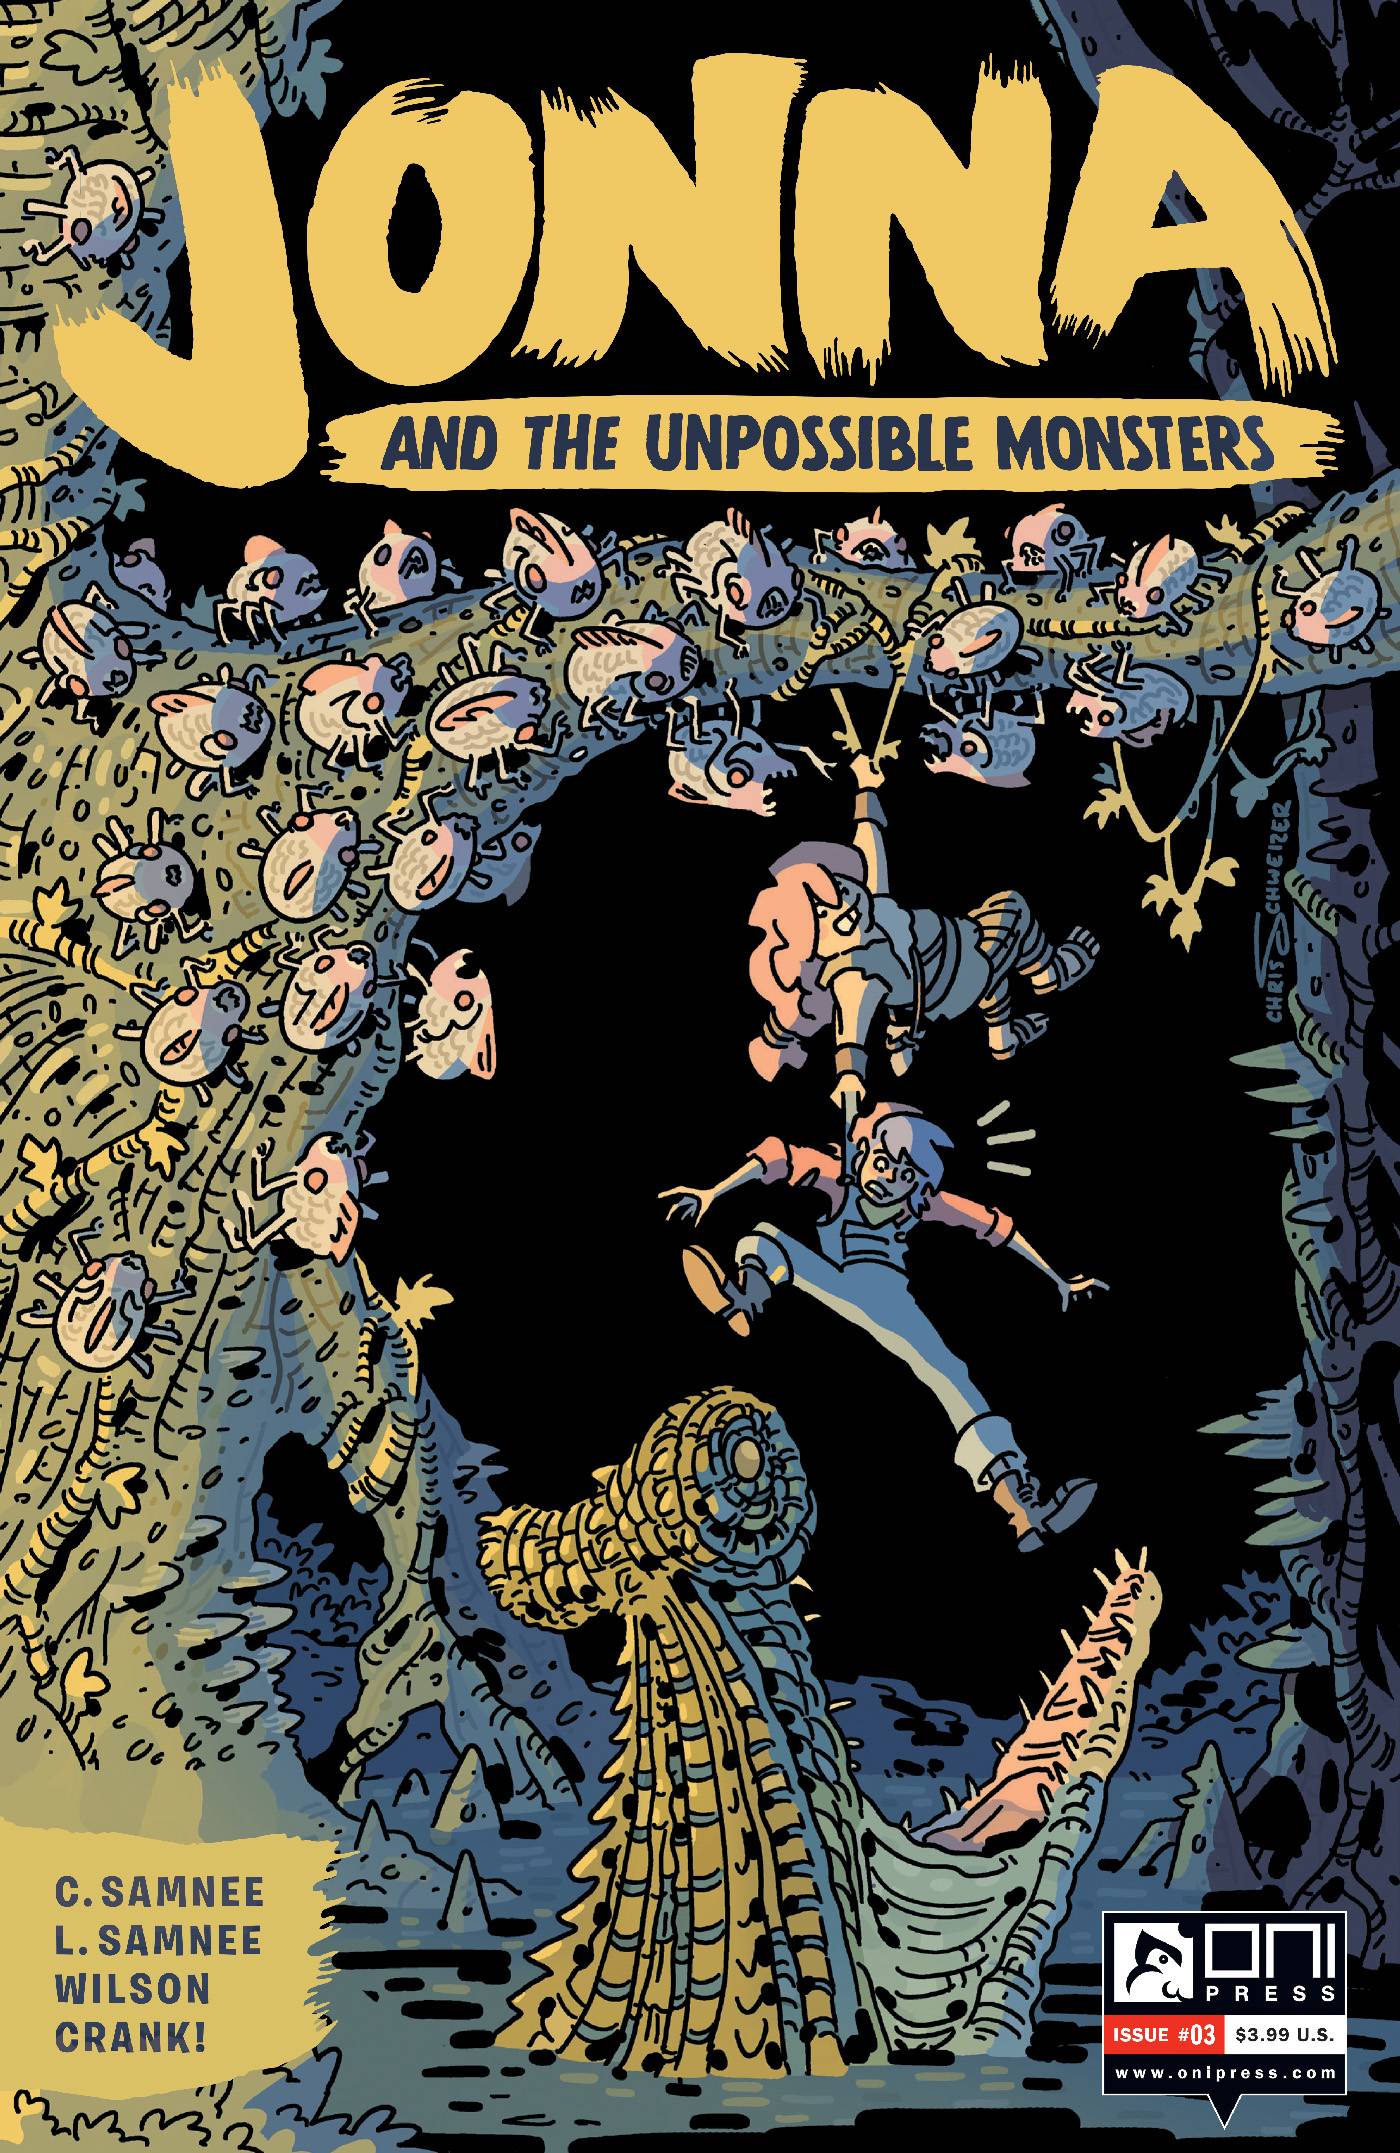 JONNA AND THE UNPOSSIBLE MONSTERS